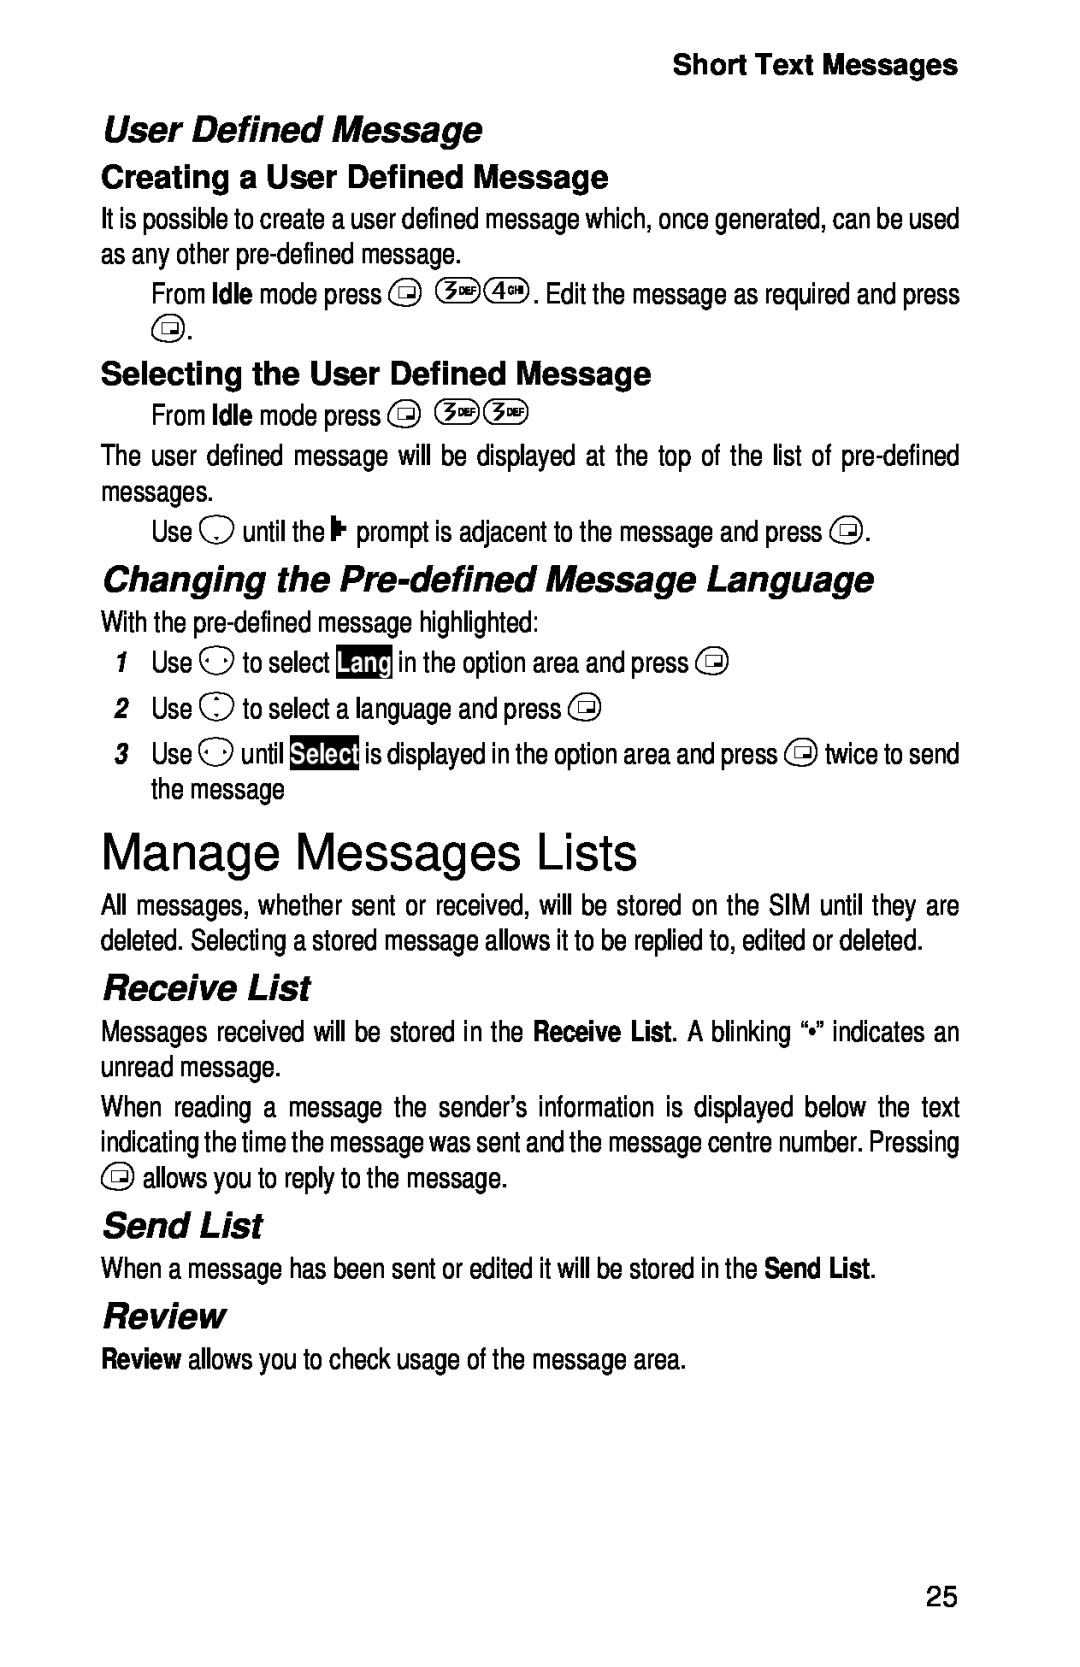 Panasonic EB-GD52 Manage Messages Lists, User Defined Message, Changing the Pre-defined Message Language, Receive List 